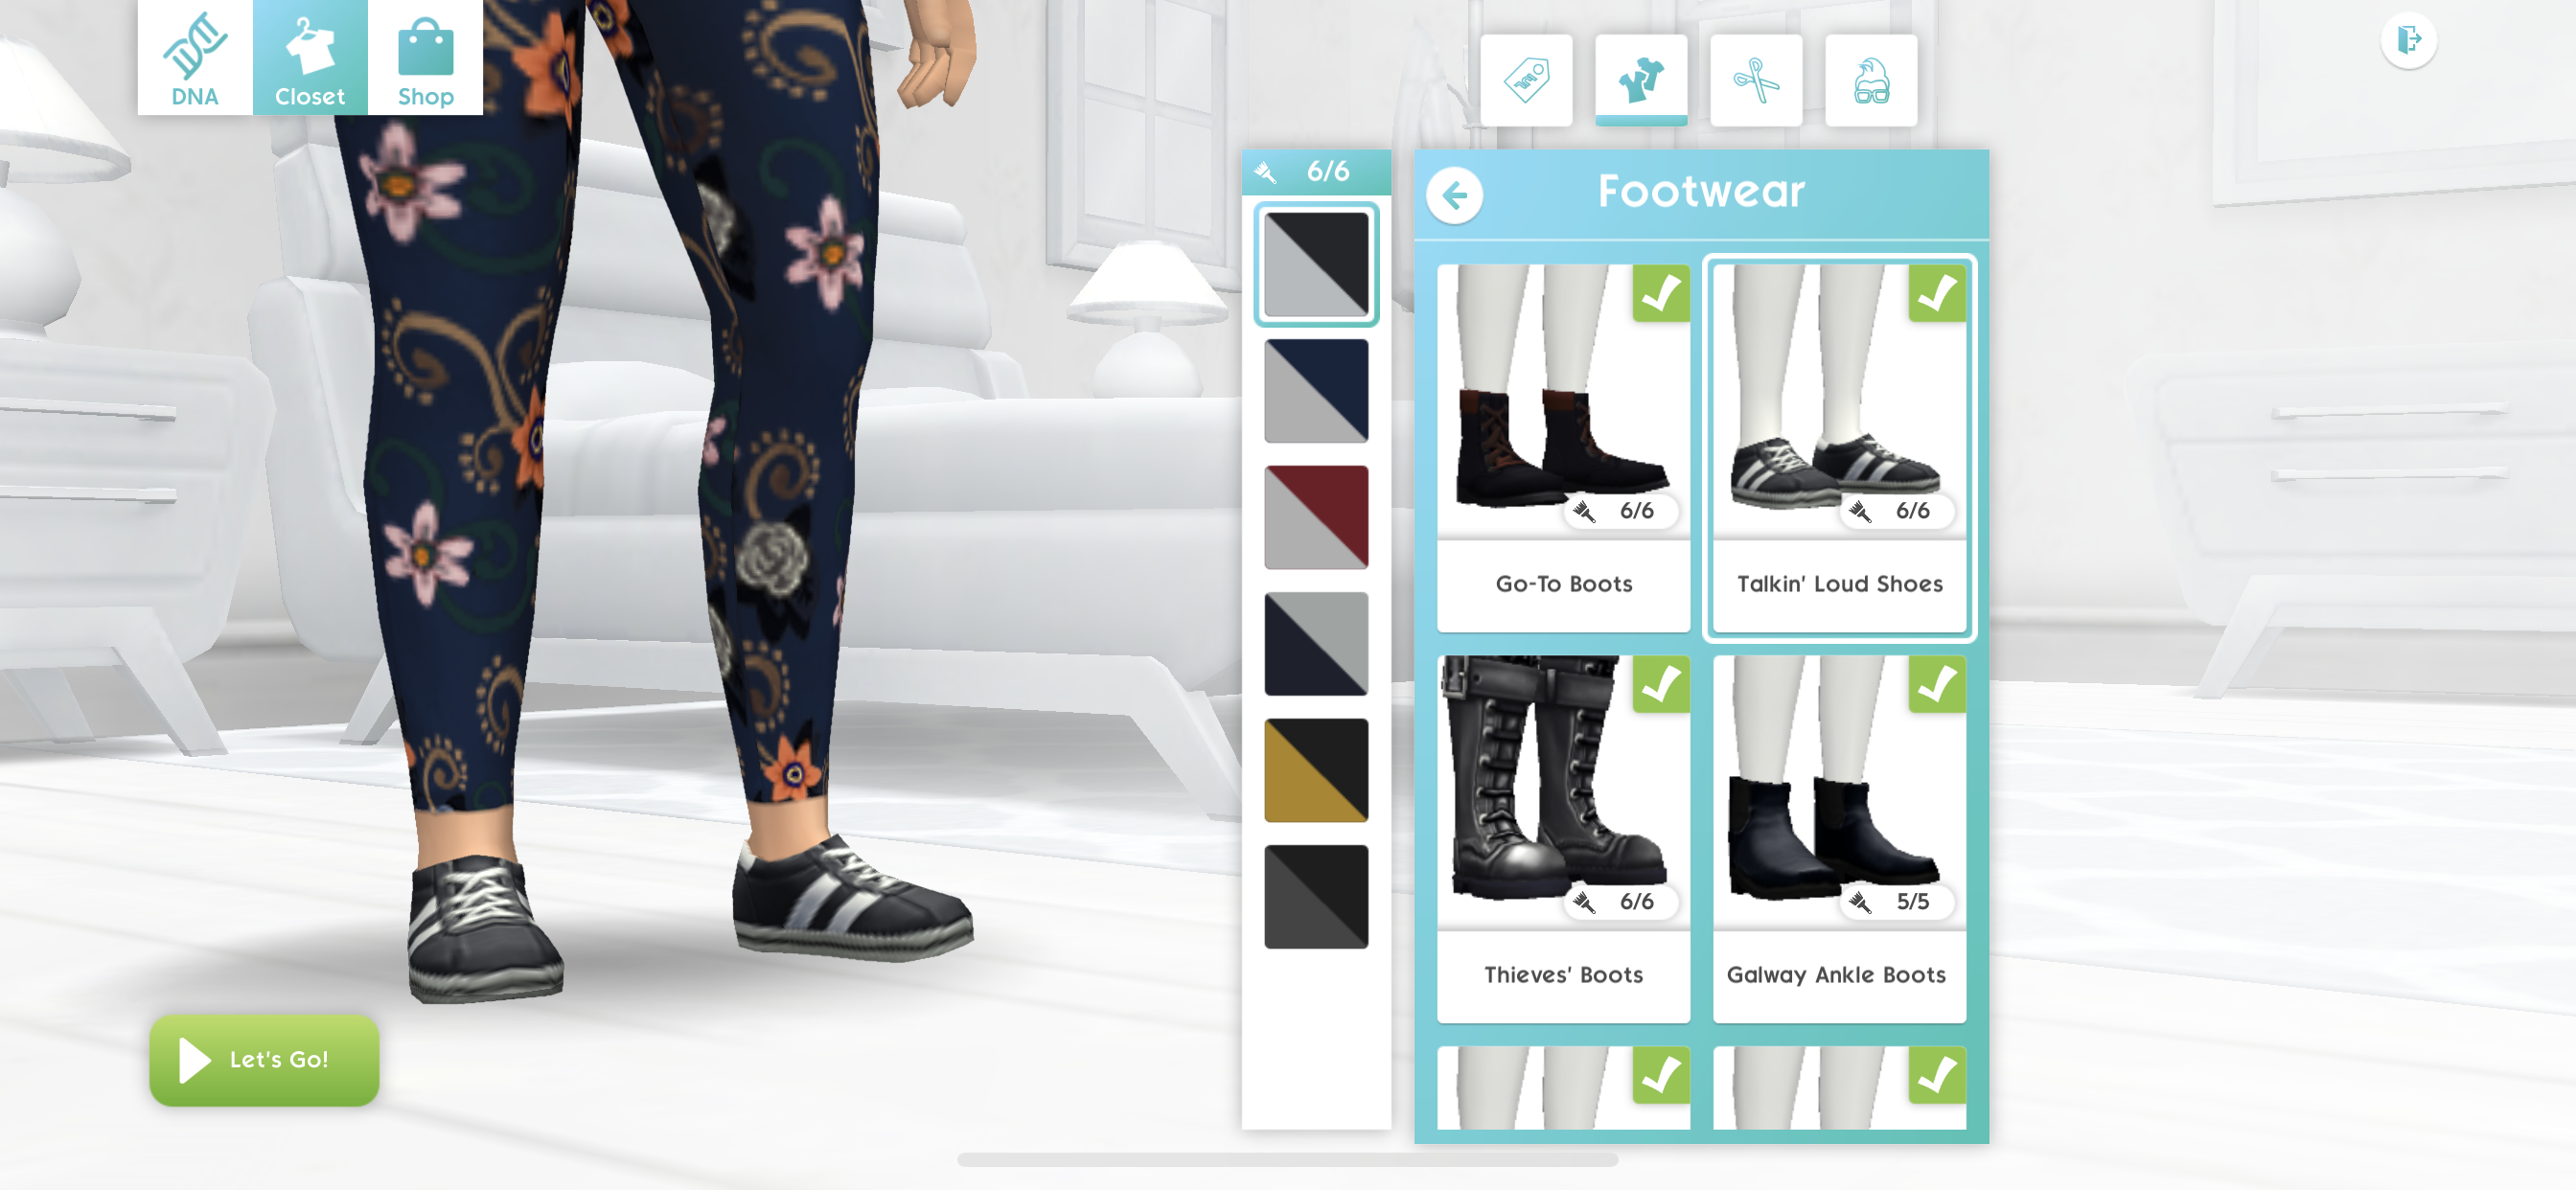 The Sims Mobile' Nabs ASOS for All You Hypebeasts Out There